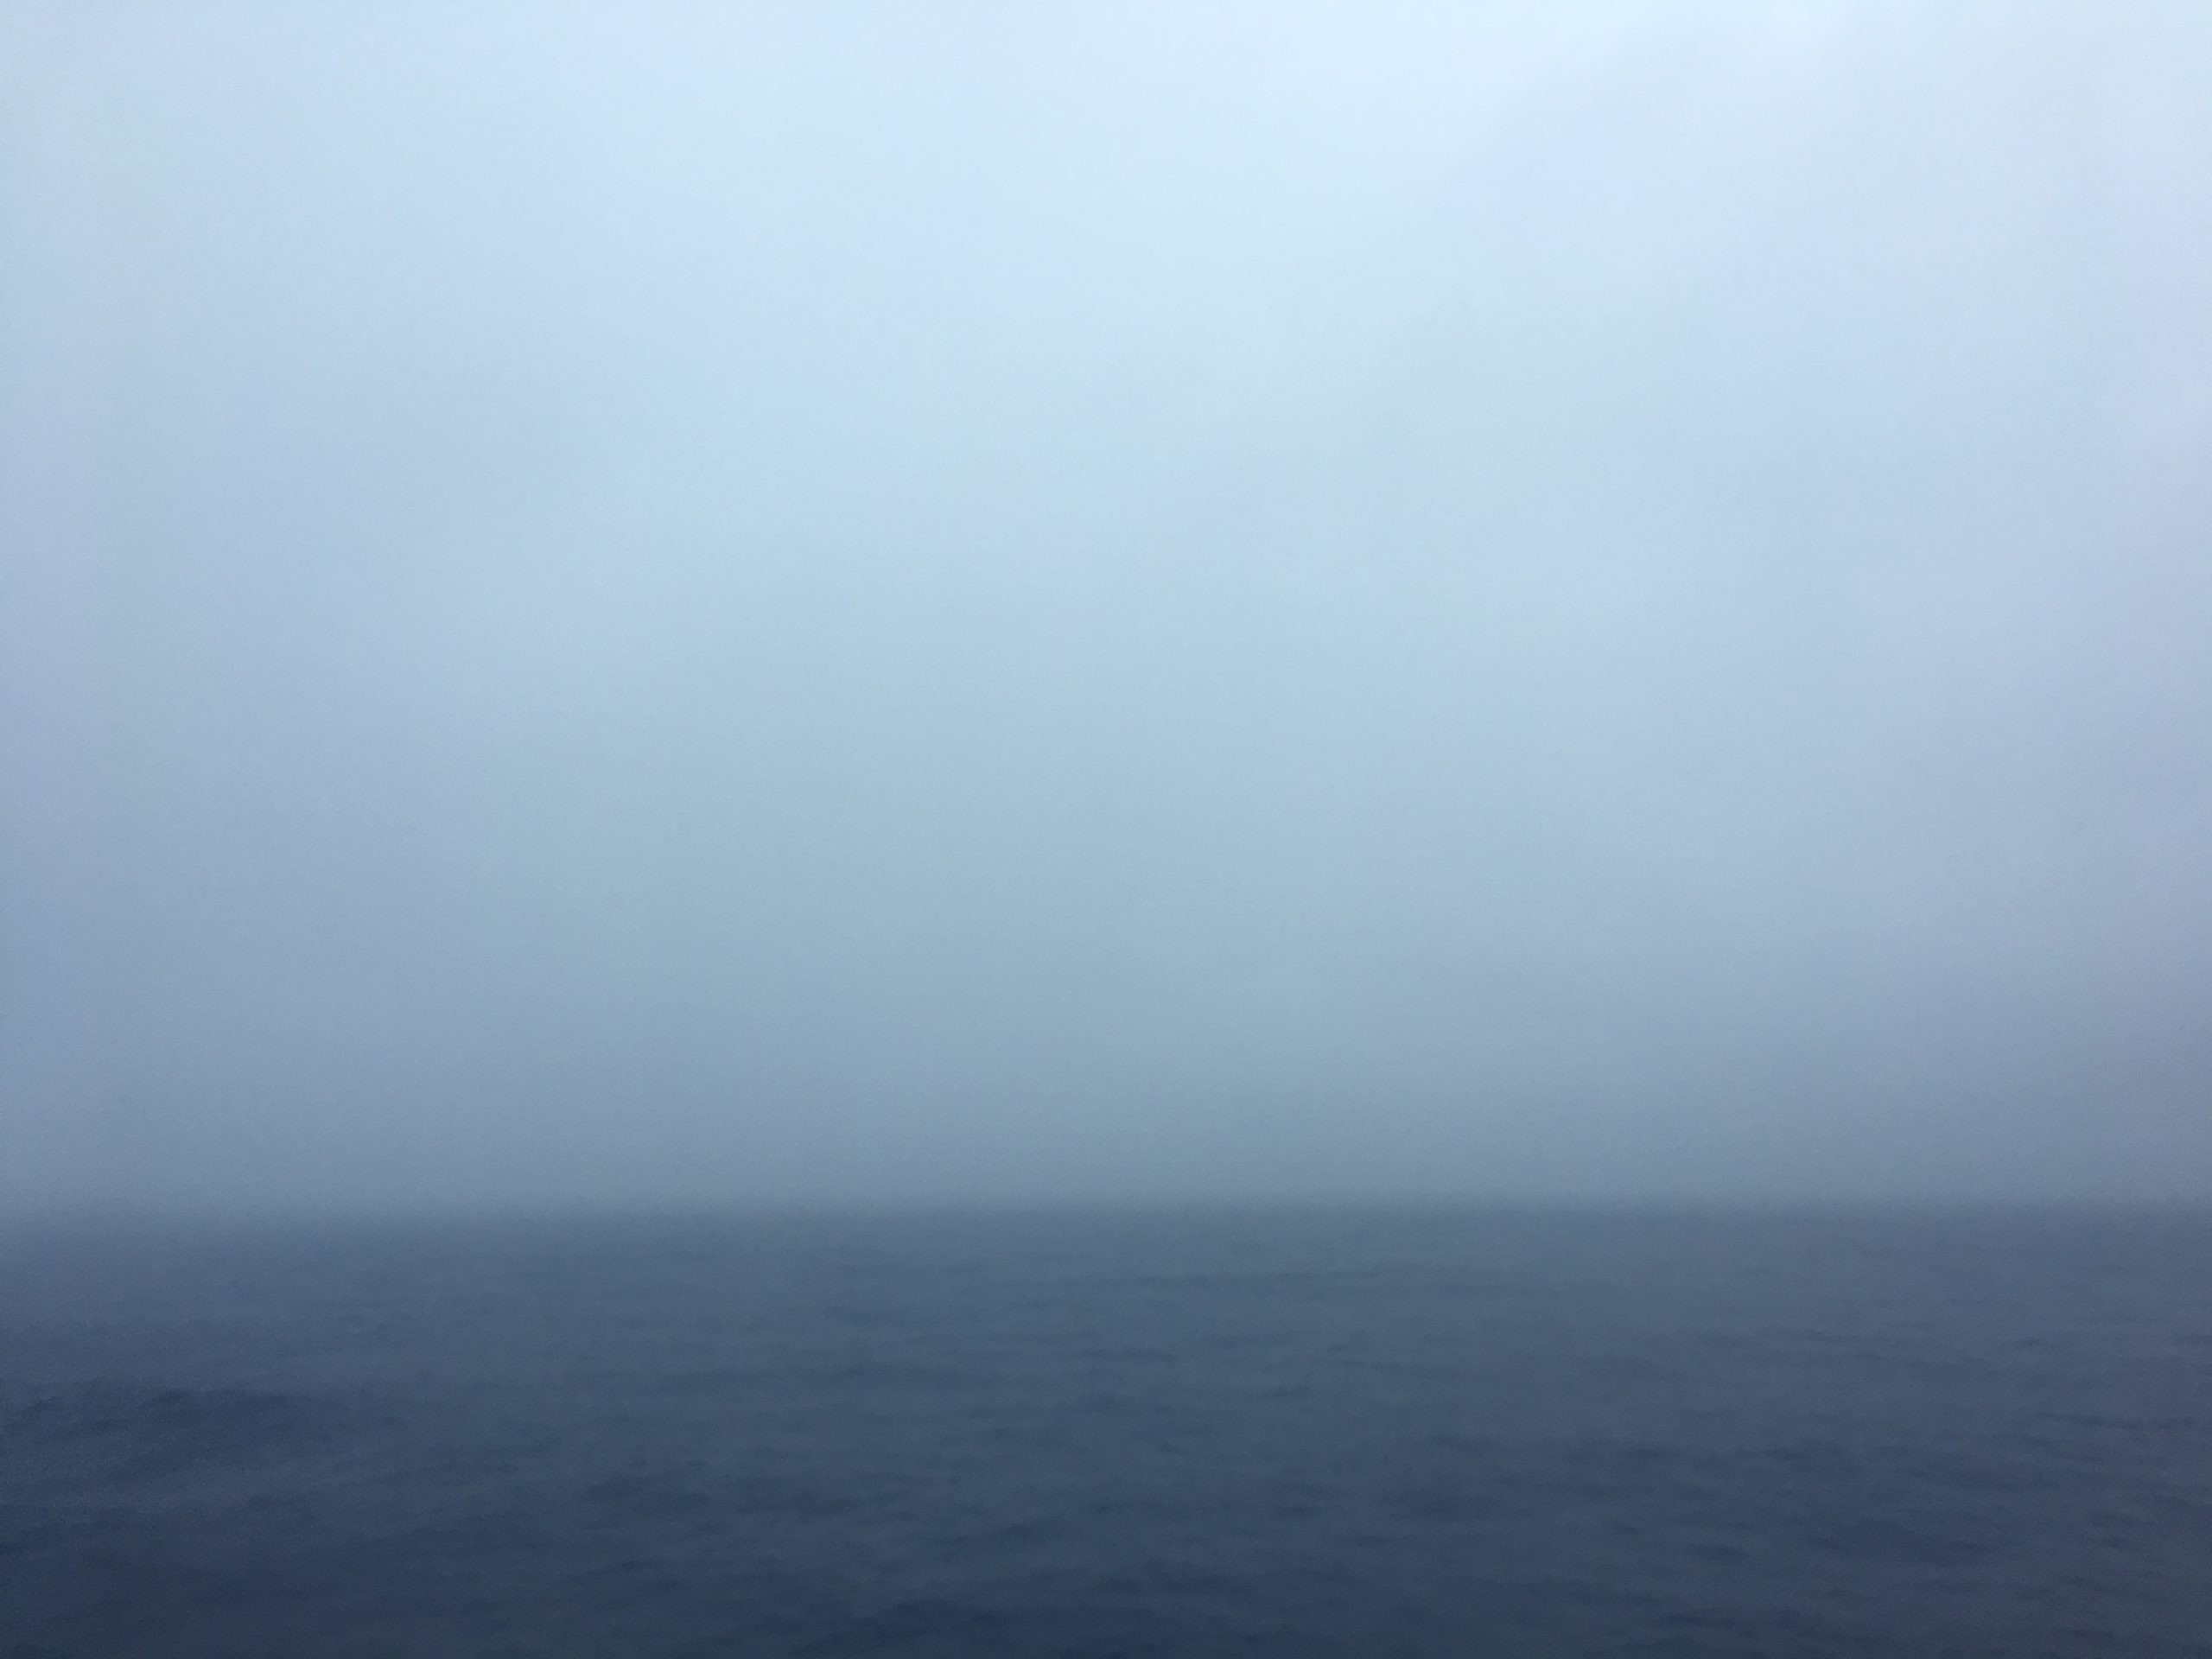 Misty morning in the Philippine Sea